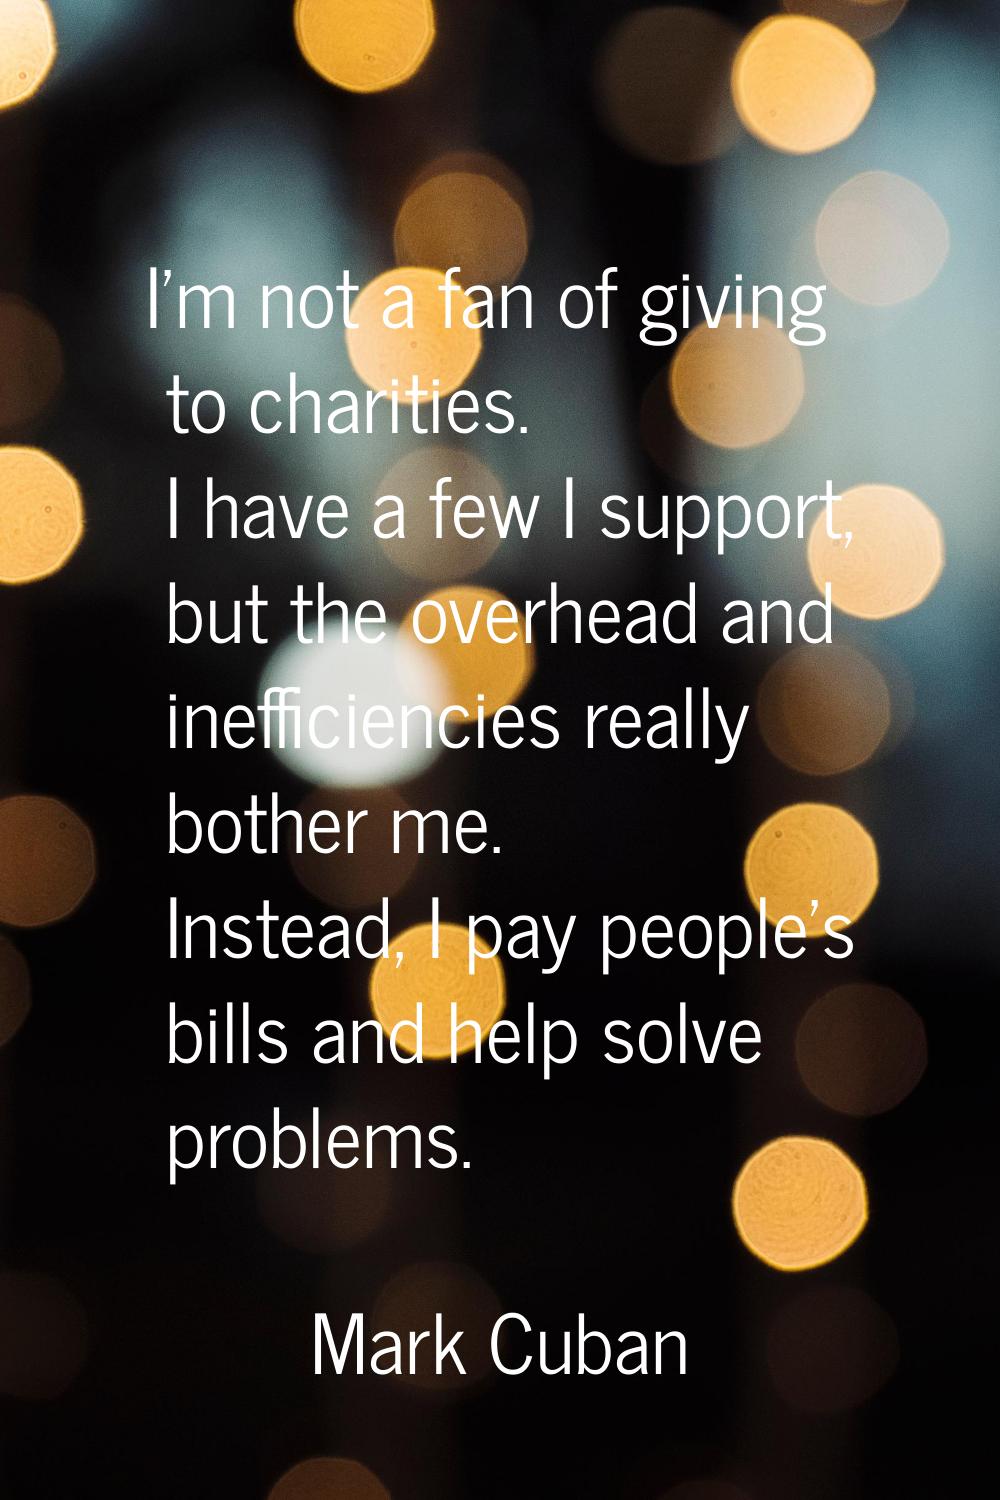 I'm not a fan of giving to charities. I have a few I support, but the overhead and inefficiencies r